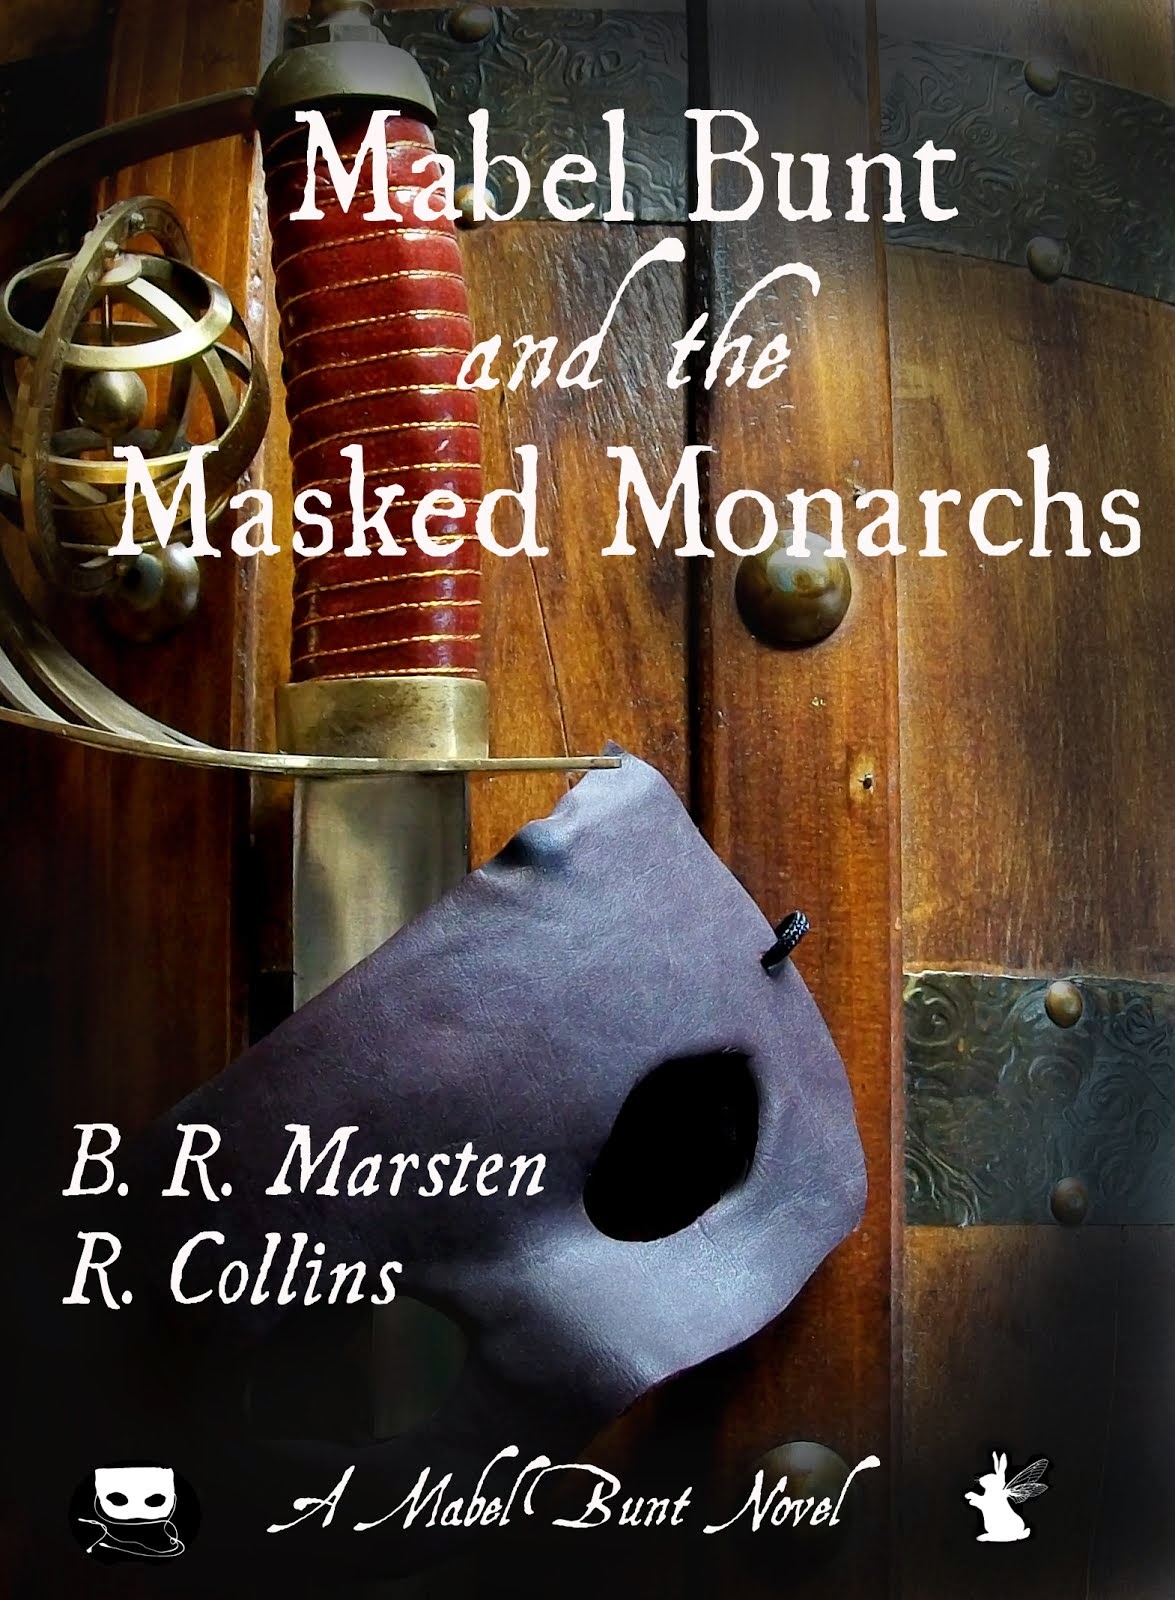 Mabel Bunt and the Masked Monarchs